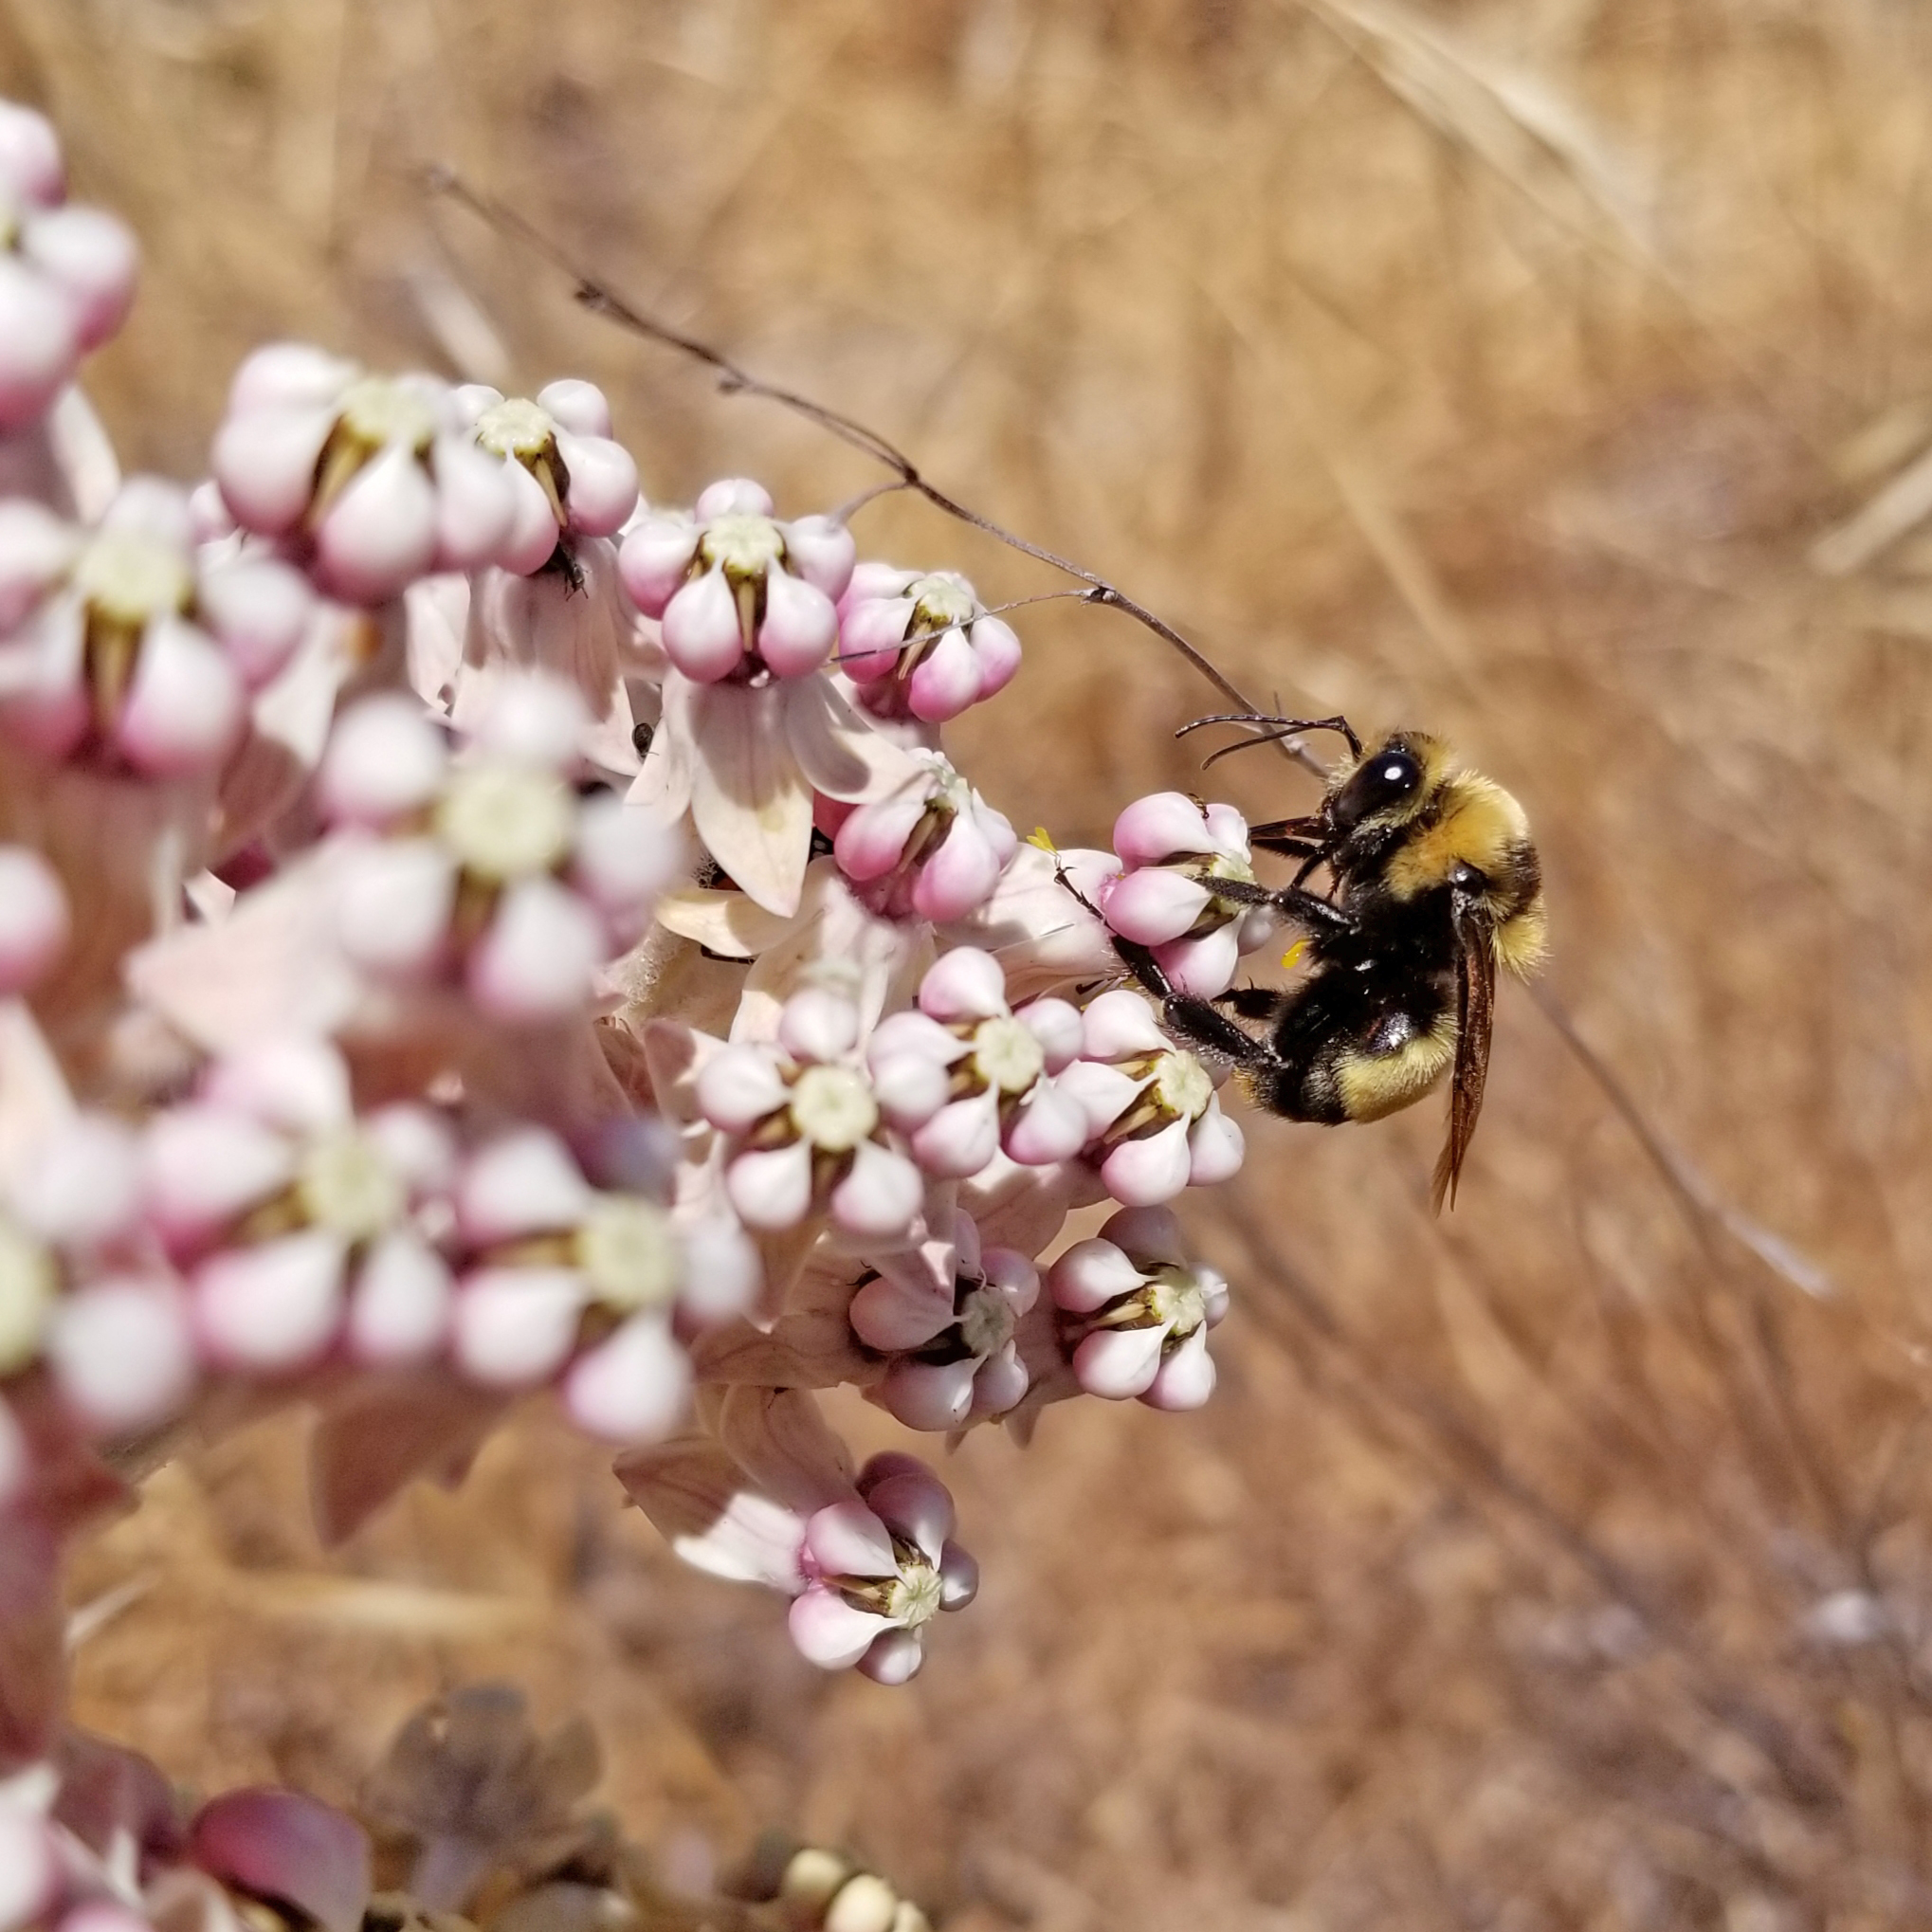 A fuzzy bumble bee with large, round, shiny eyes clings to pink milkweed blossoms, in an arid landscape..